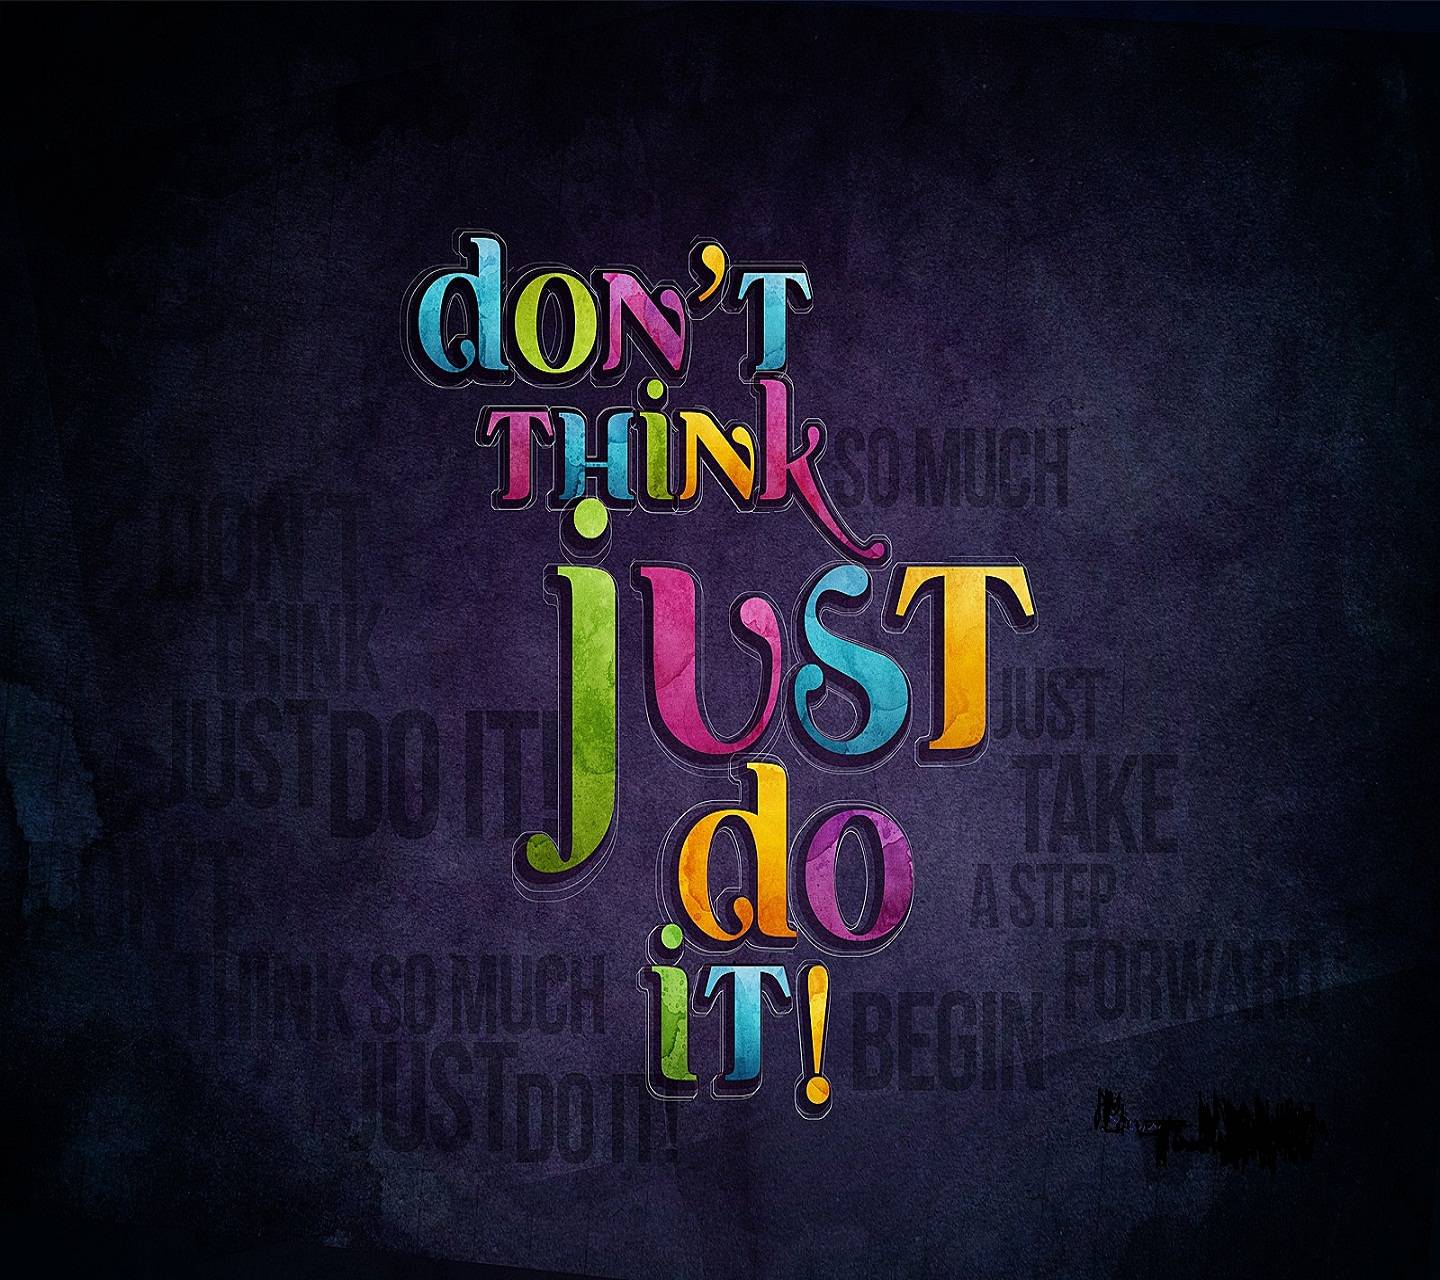 Download free just do it wallpaper for your mobile phone